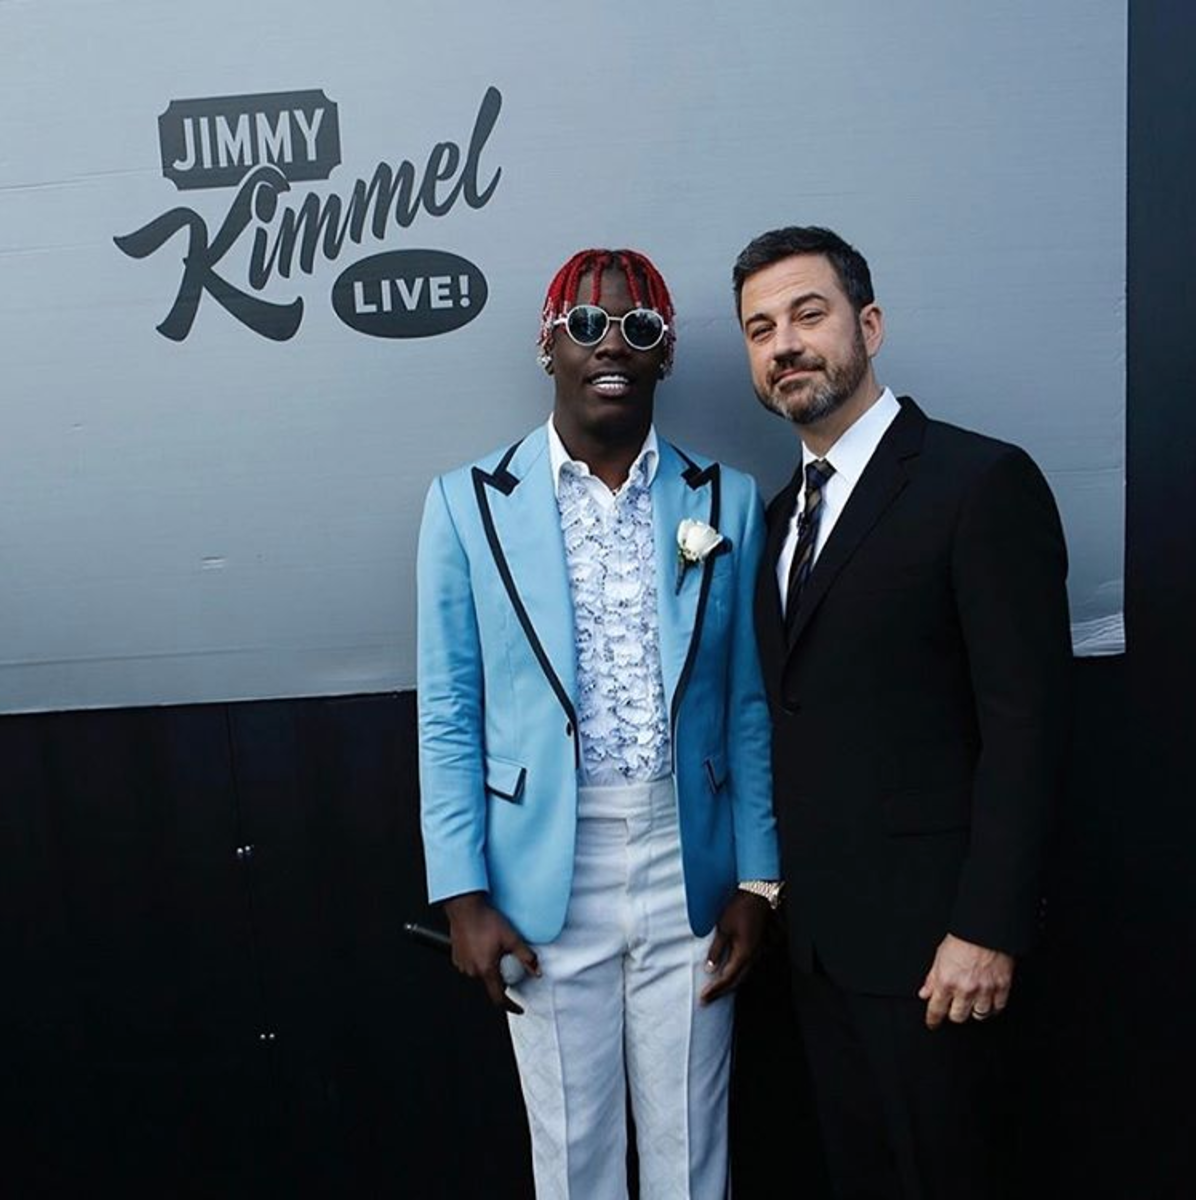 SPOTTED: Lil Yatchy In Gucci At The Jimmy Kimmel Live Show